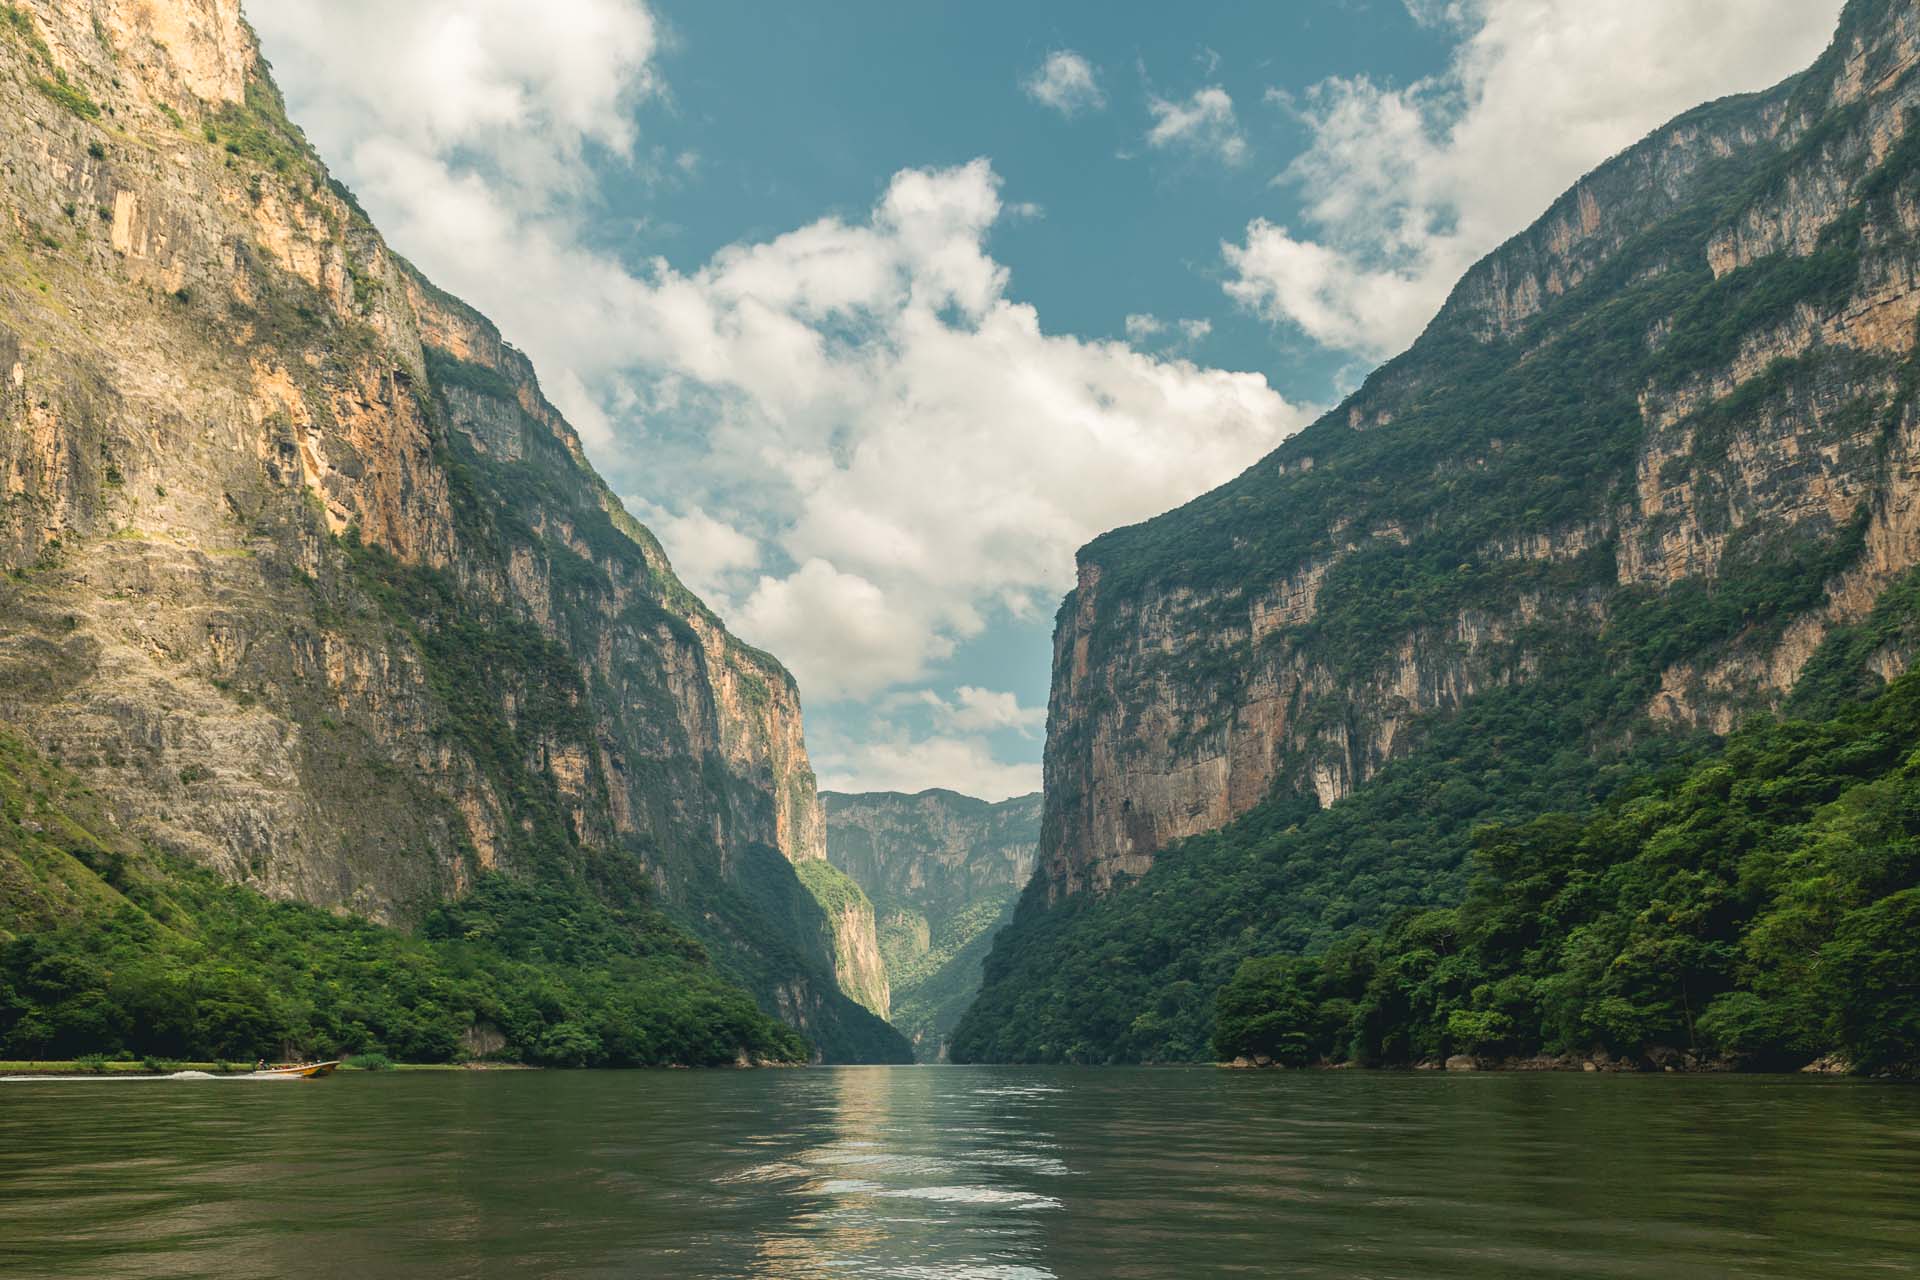 Sumidero Canyon was so breathtaking. We sailed through it and enjoyed every minute.